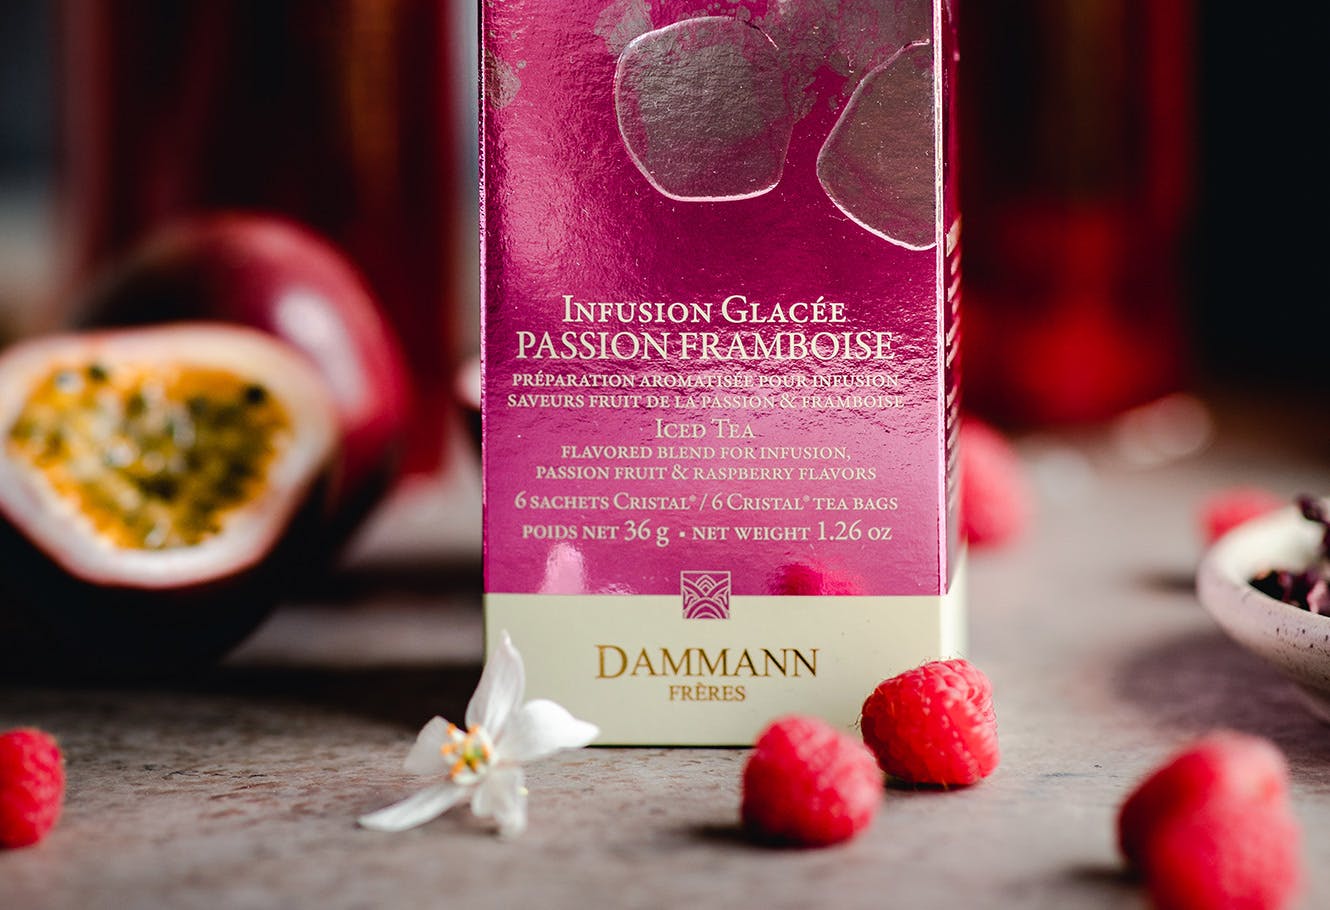 Box of iced tea bags "Passion Framboise" DAMMANN Frères.